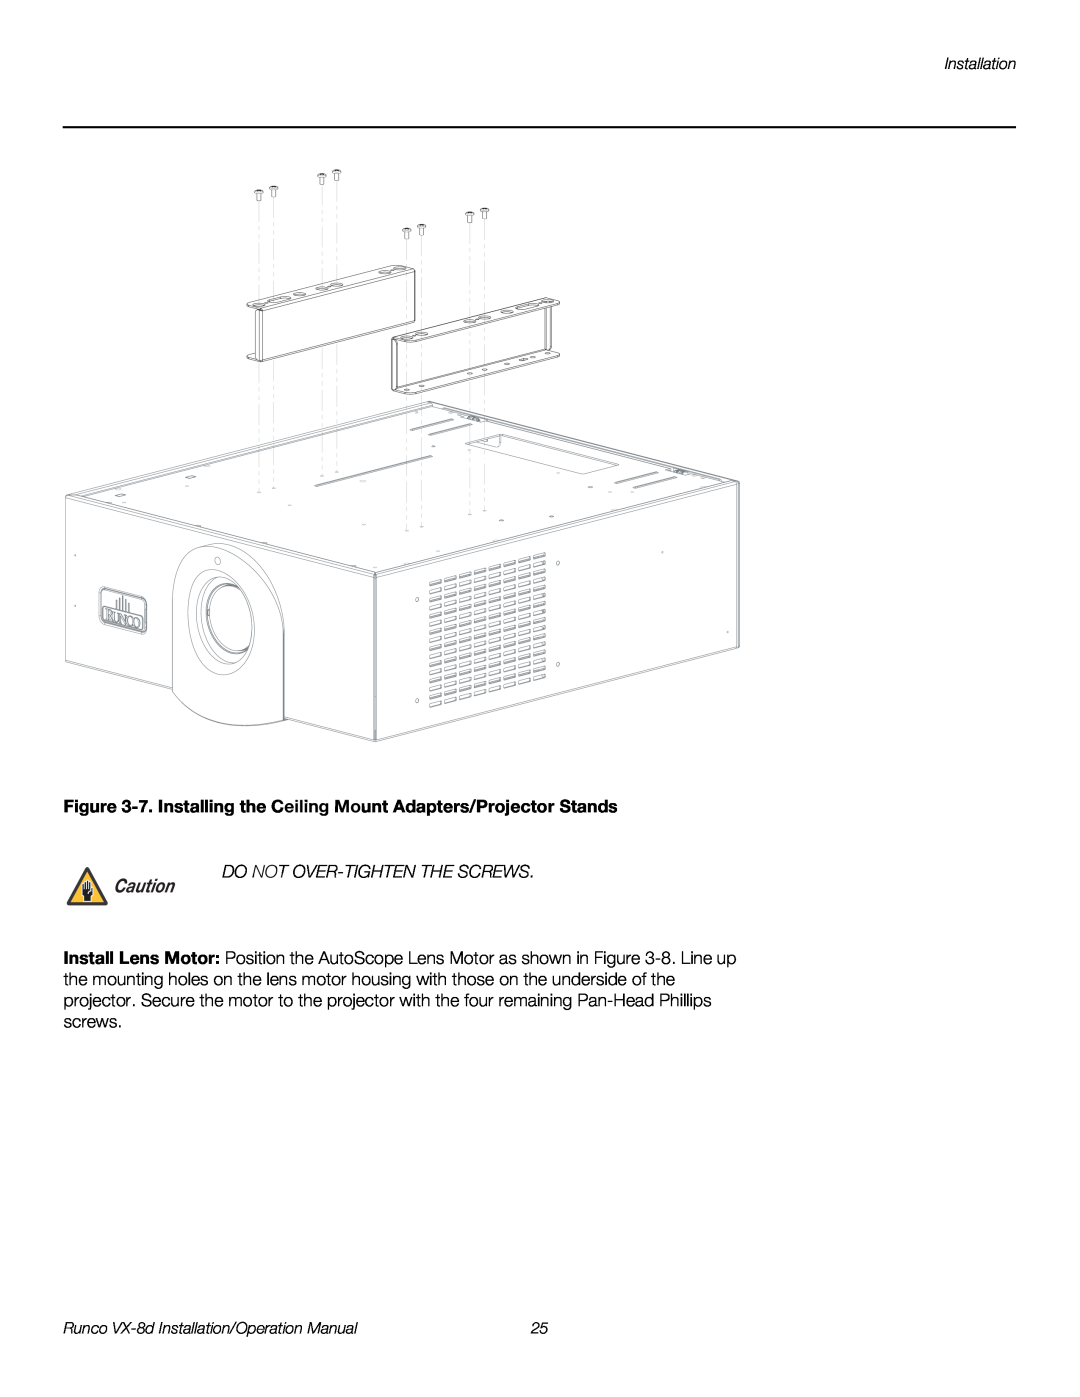 Runco VX-8D operation manual 7. Installing the Ceiling Mount Adapters/Projector Stands, Do Not Over-Tighten The Screws 